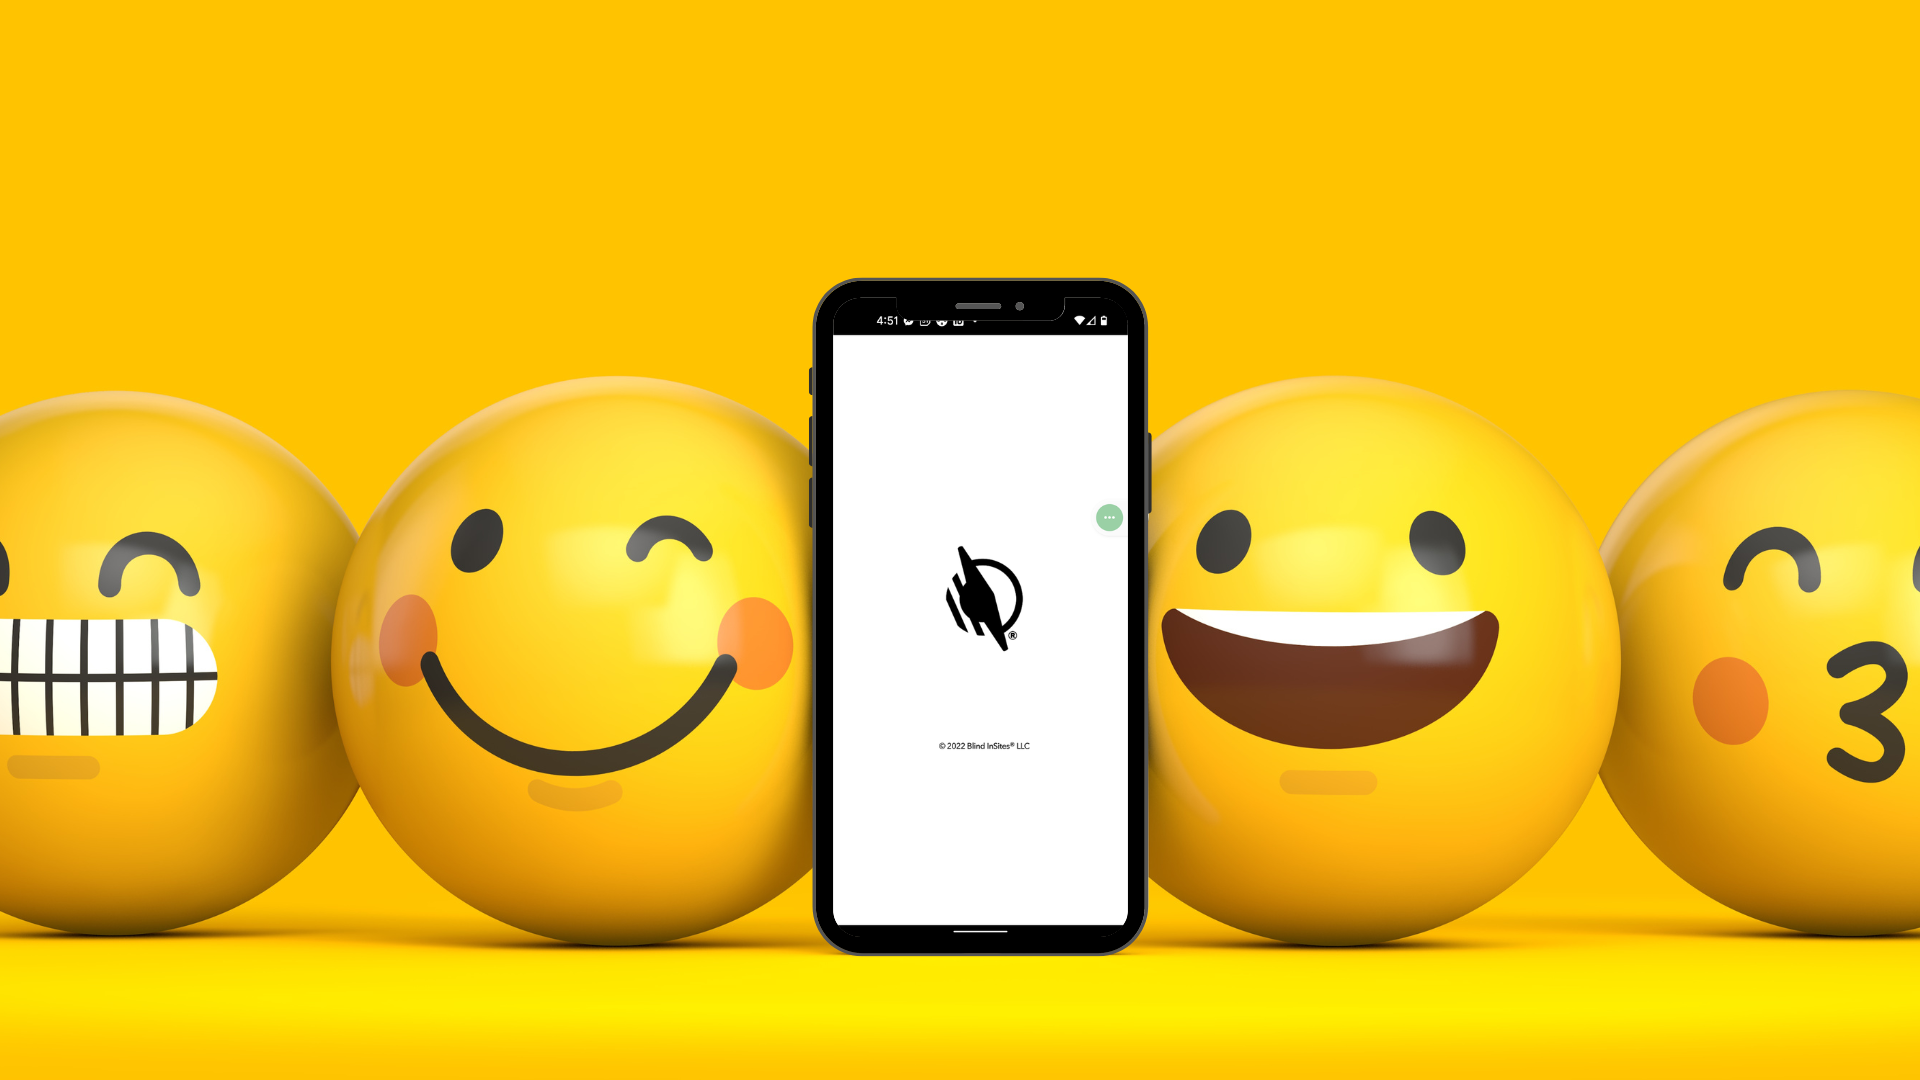 Sunny yellow background with a smartphone in the center. The phone shows the WayAround splash screen. 3D emojis are on either side of the phone. From left to right: grimacing face emoji, winky face, happy face, and kiss face emoji.